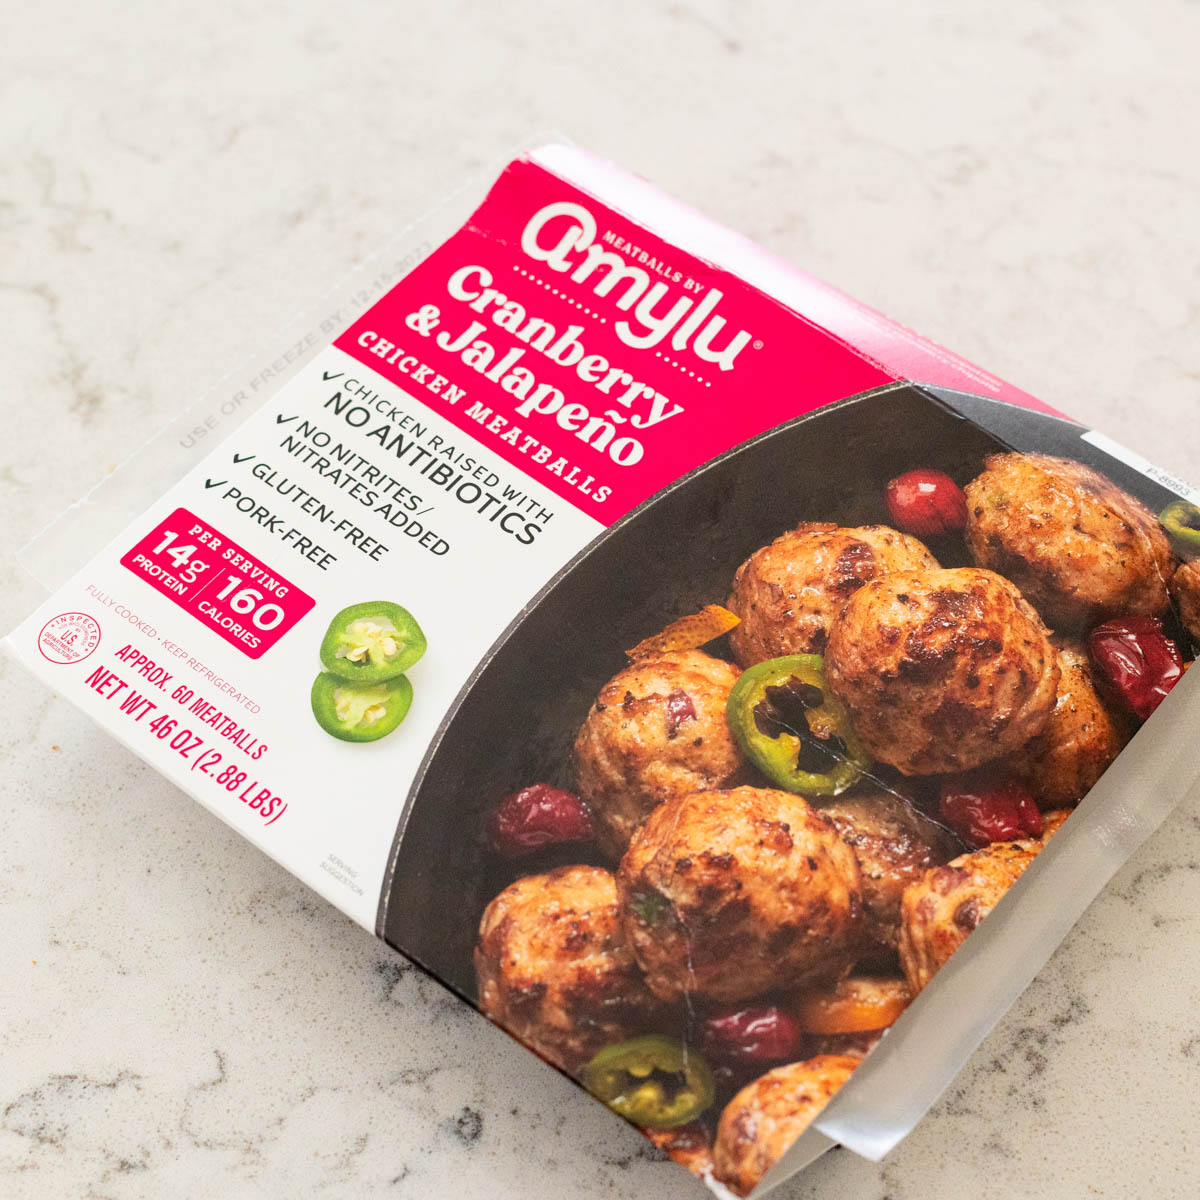 A package of Amylu Cranberry Jalapeño Meatballs from Costco sits on the counter.